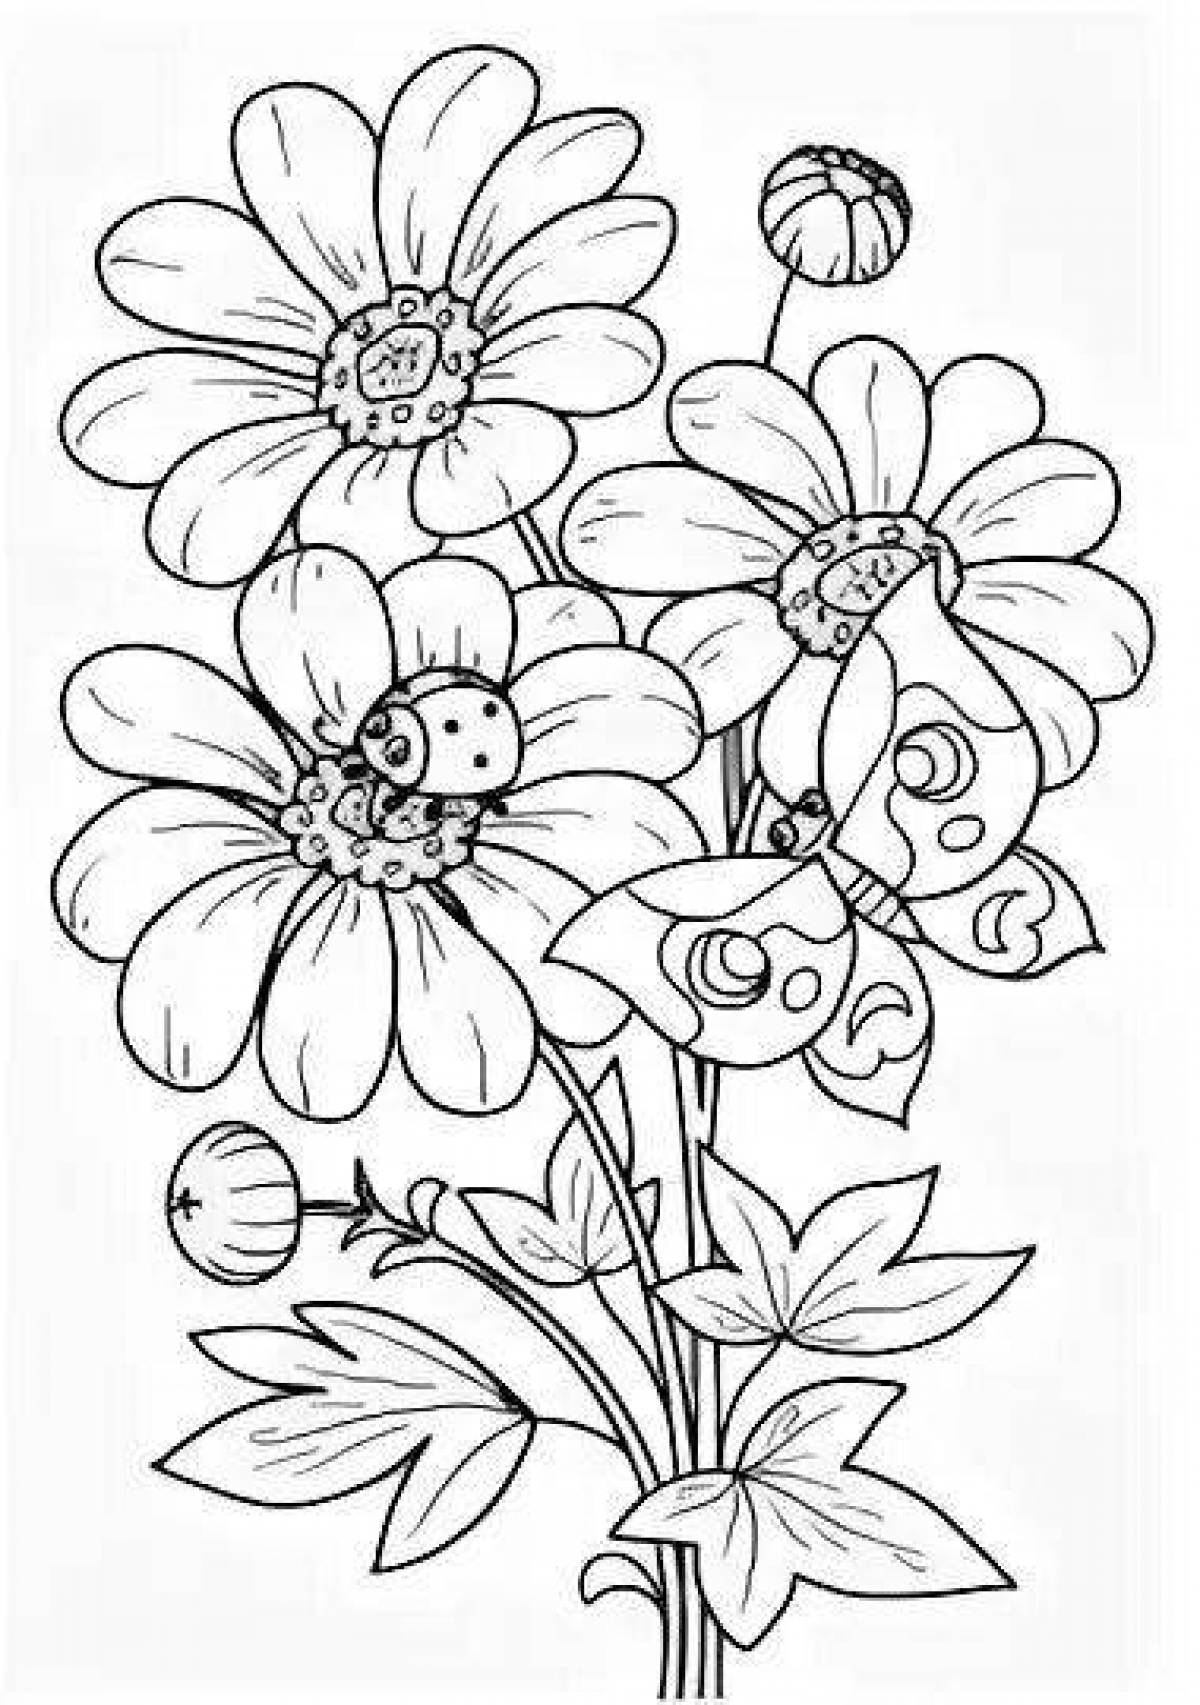 Coloring live bouquet of daisies